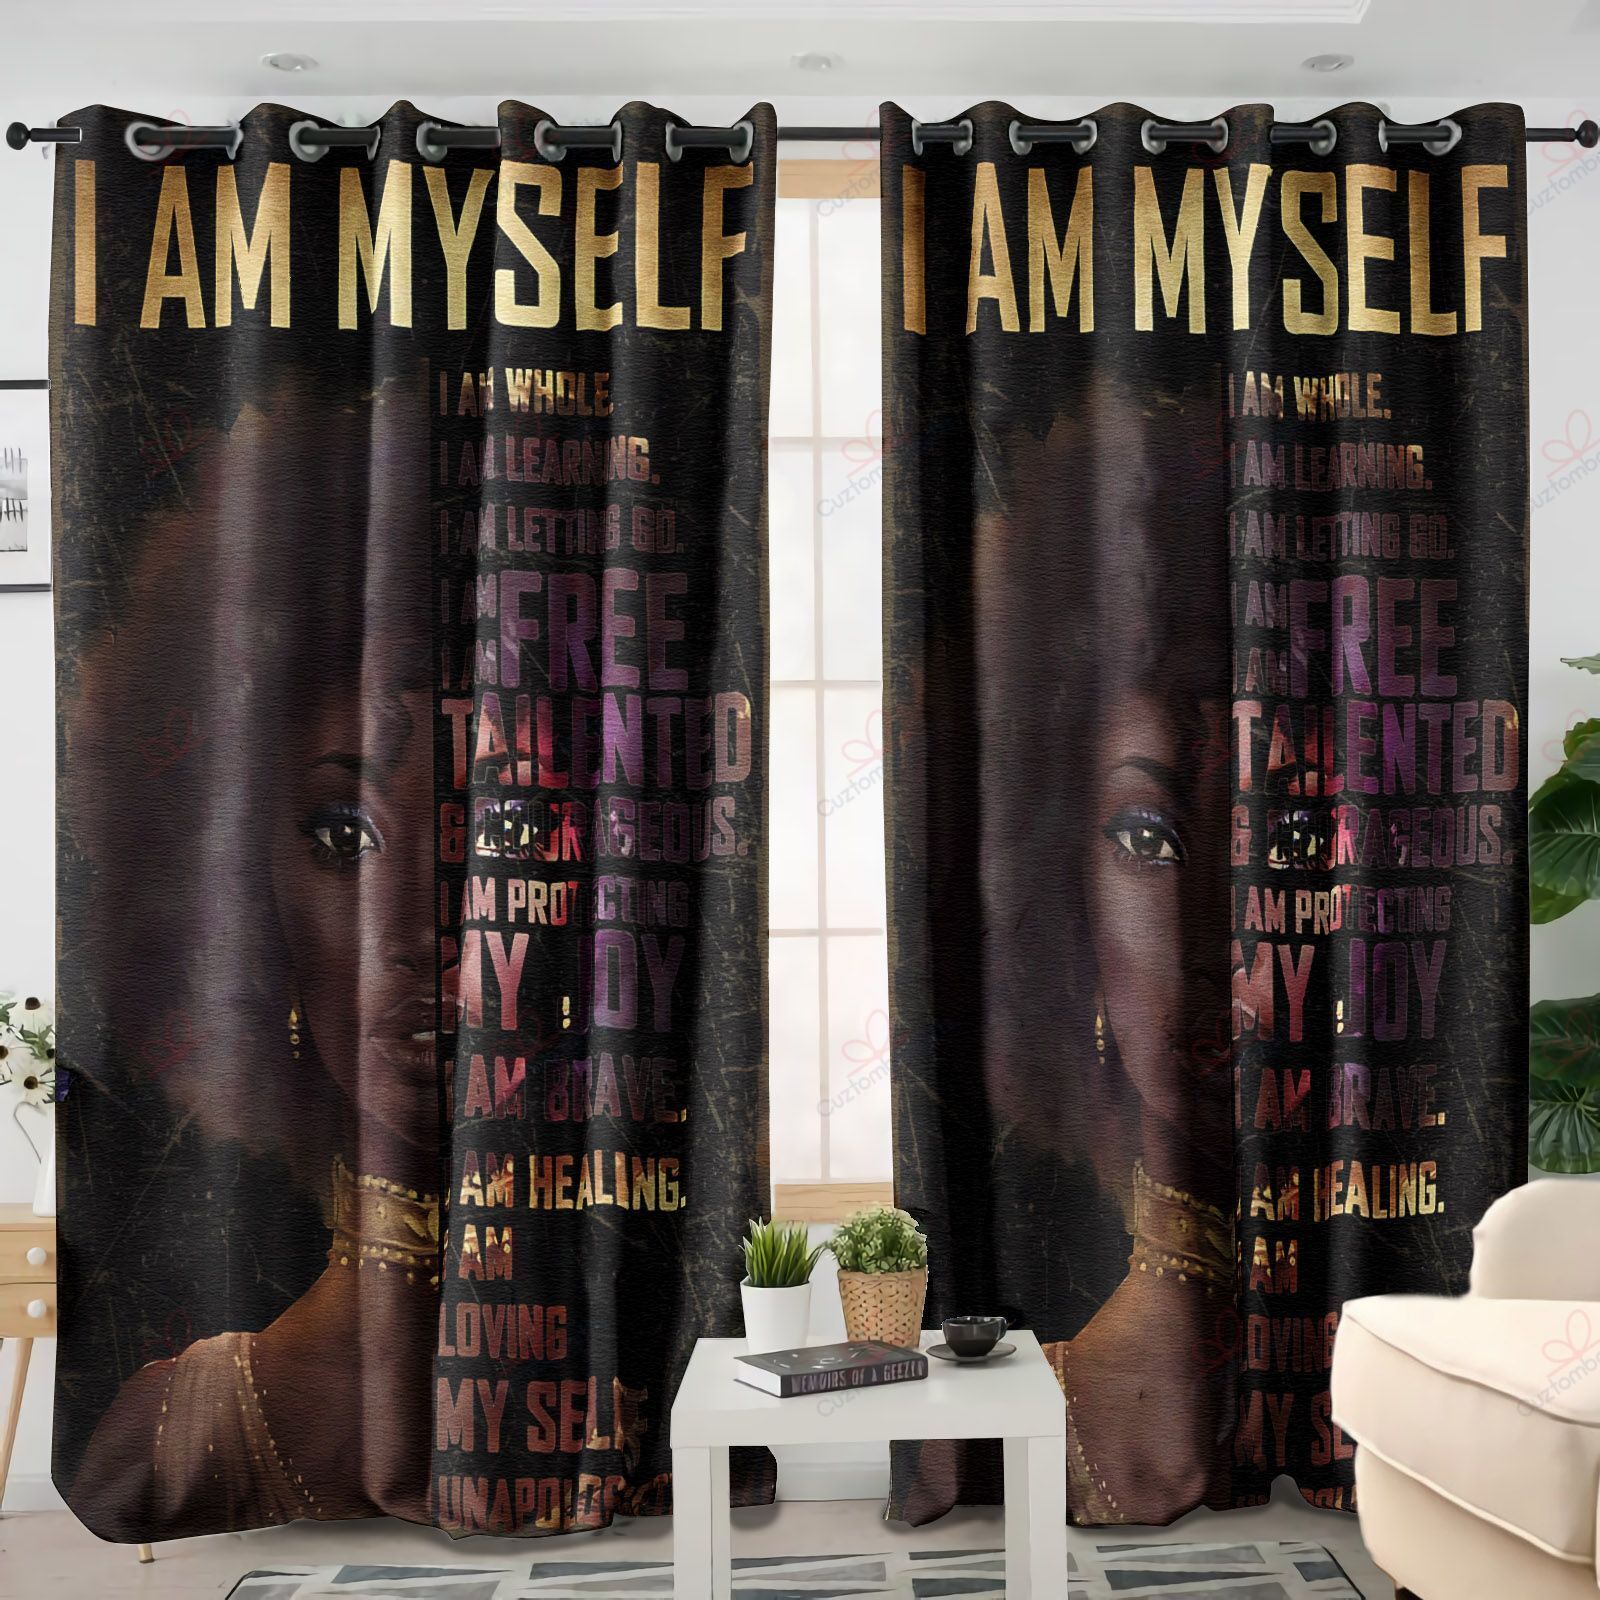 black girl i am free protecting my joy unapologetically printed window curtain home decor 5686